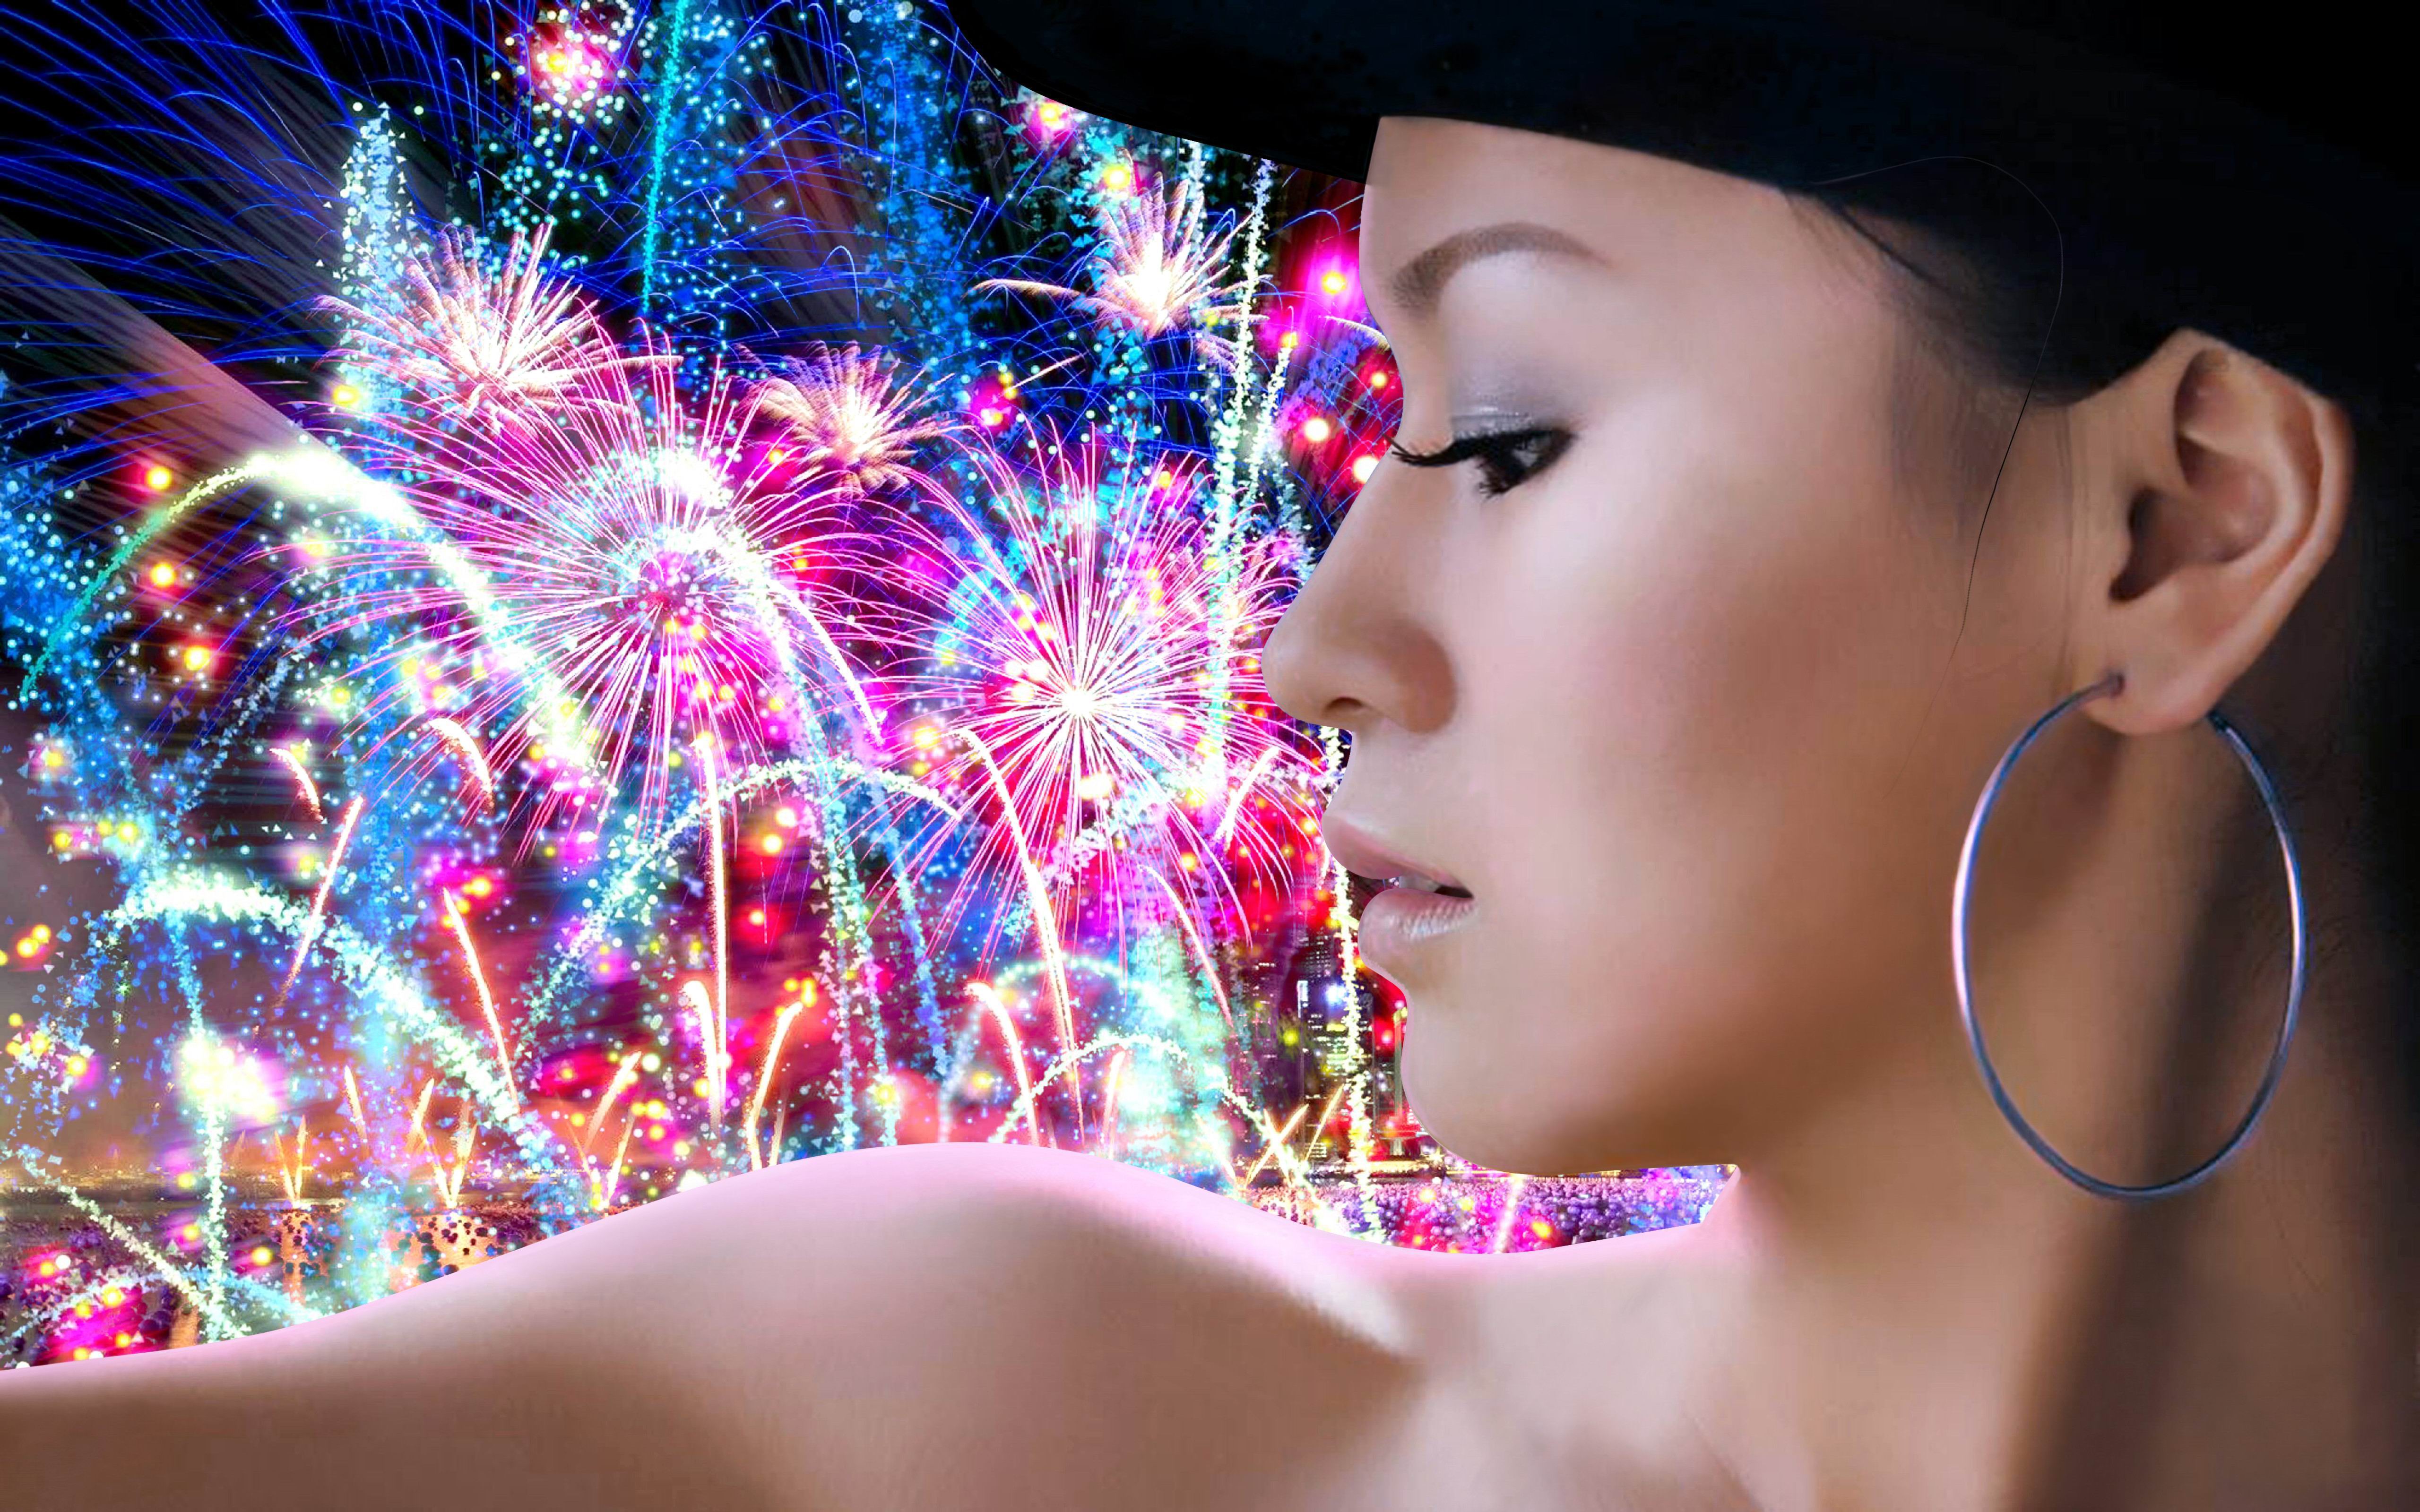 Asian Colorful Earrings Face Fireworks Hat Model New Year Oriental Profile 5120x3200